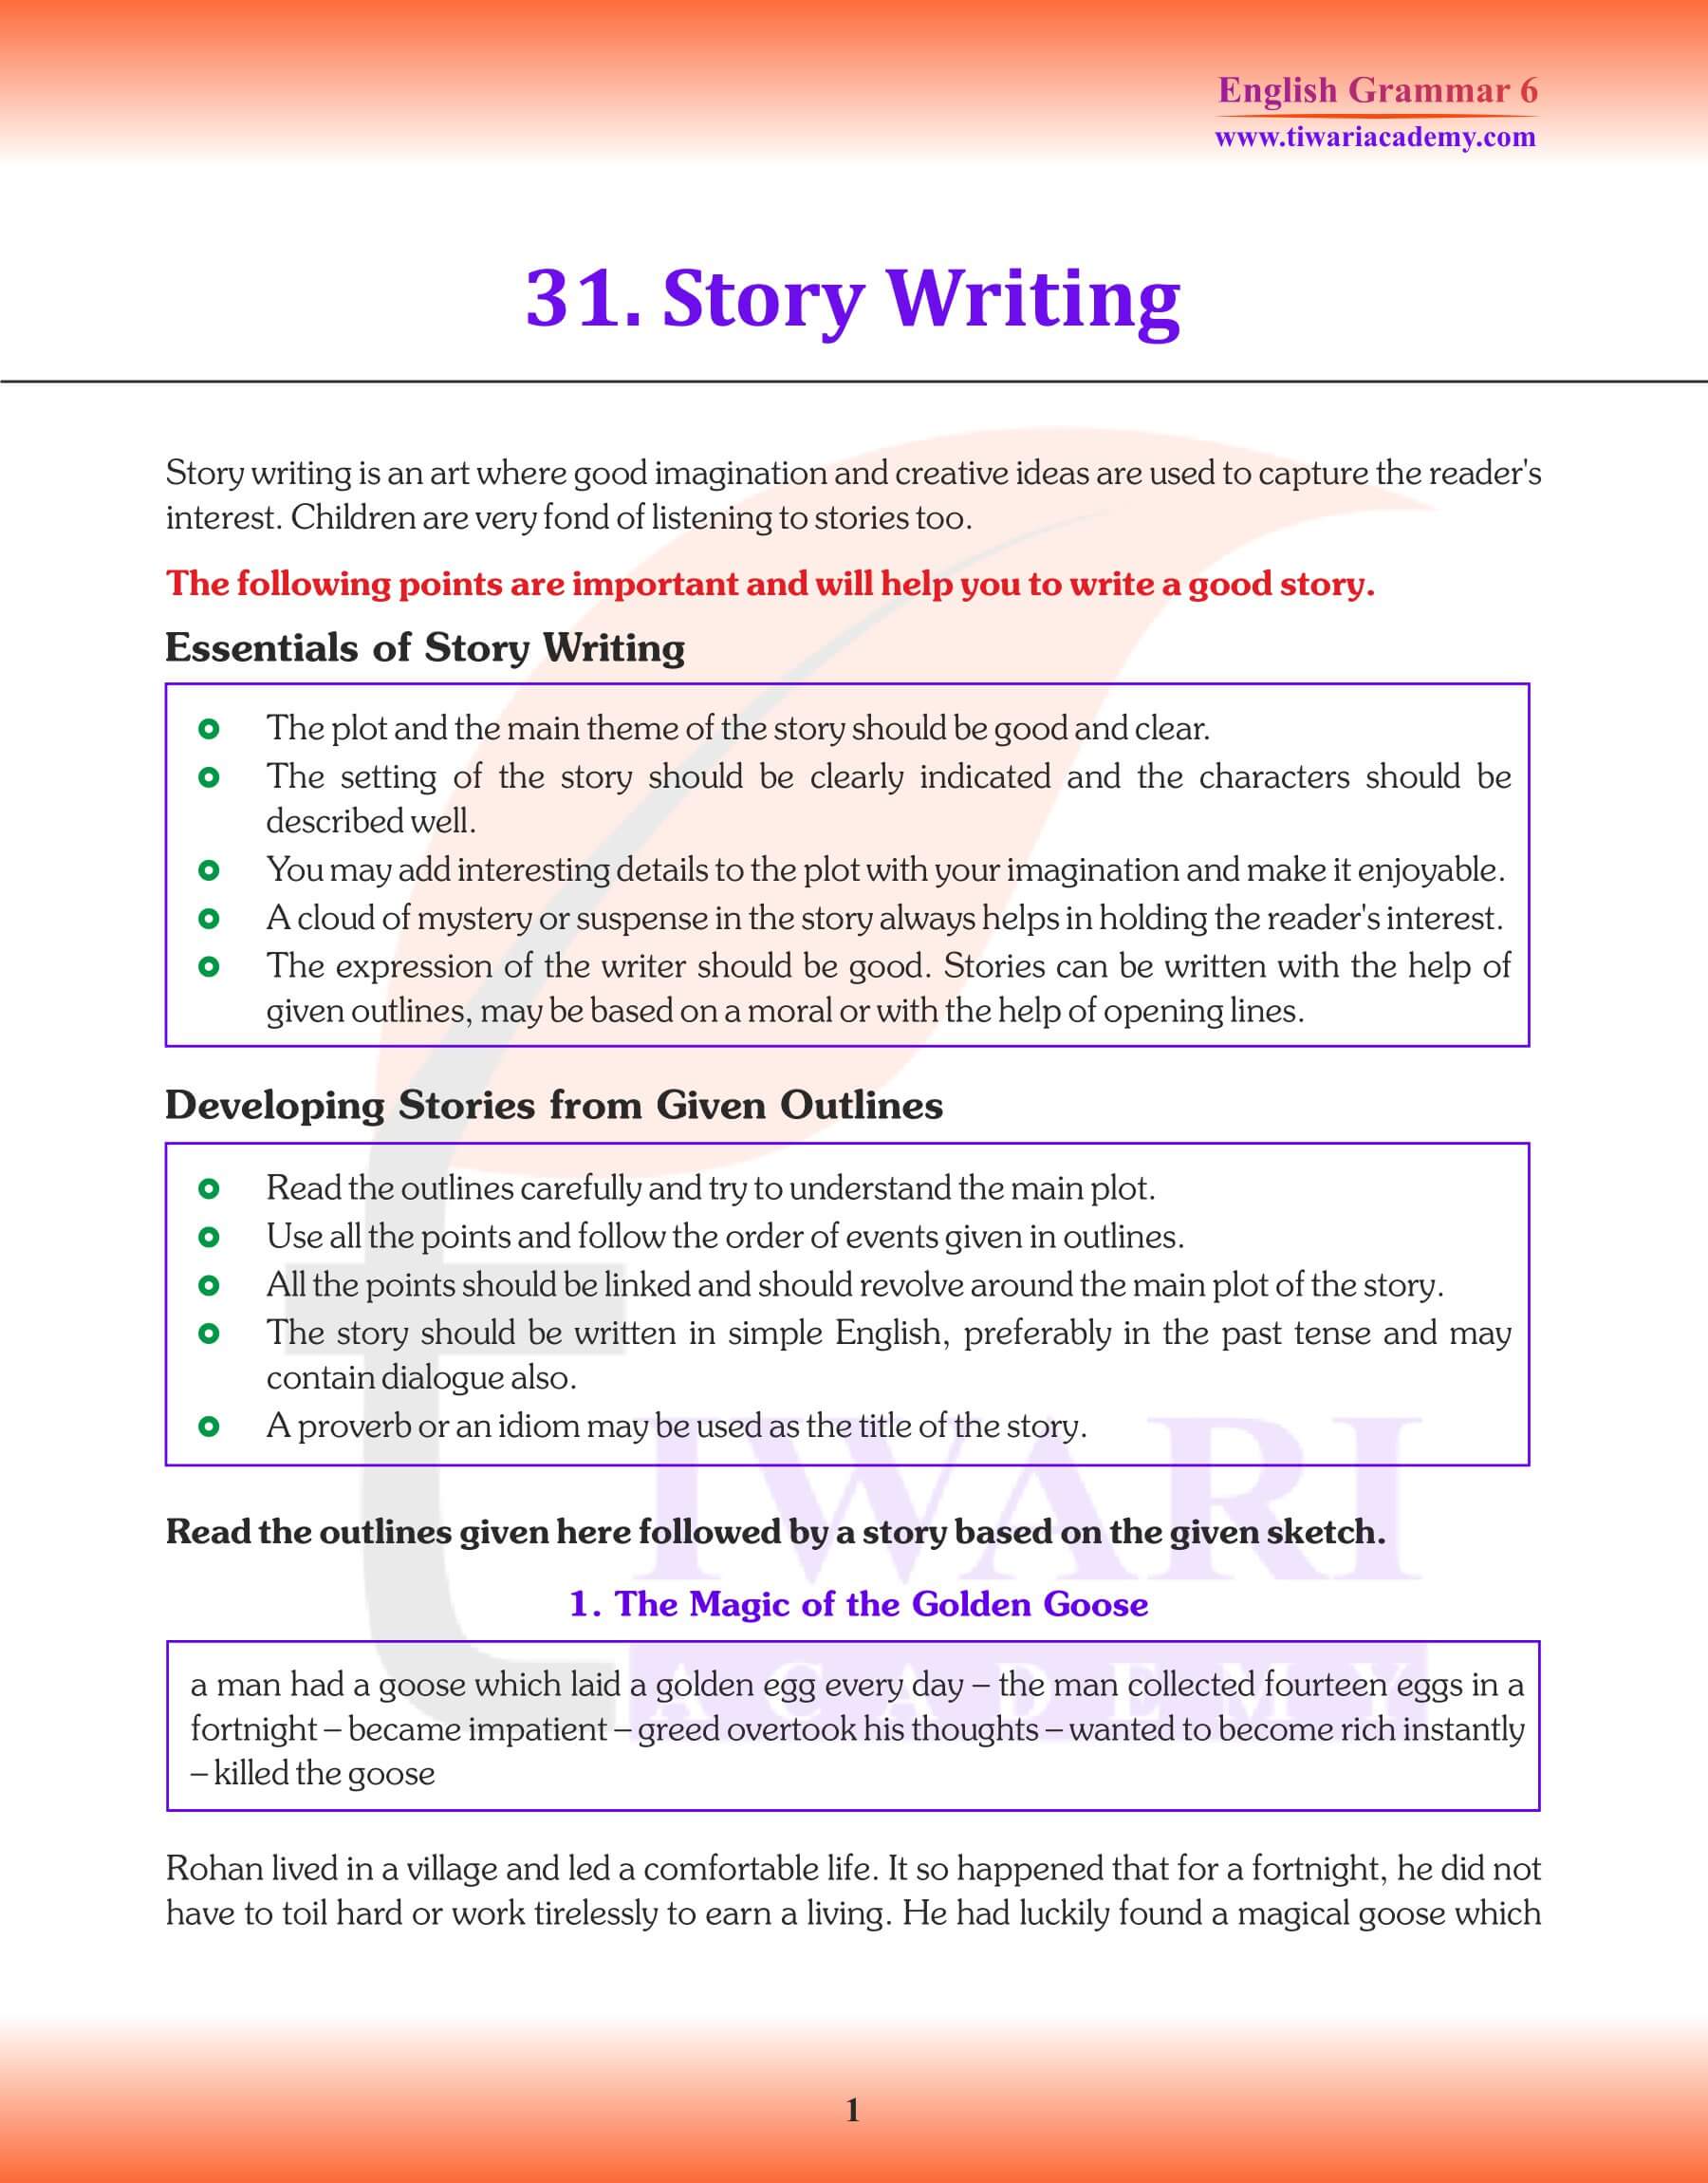 Class 6 Grammar Story Writing Revision book